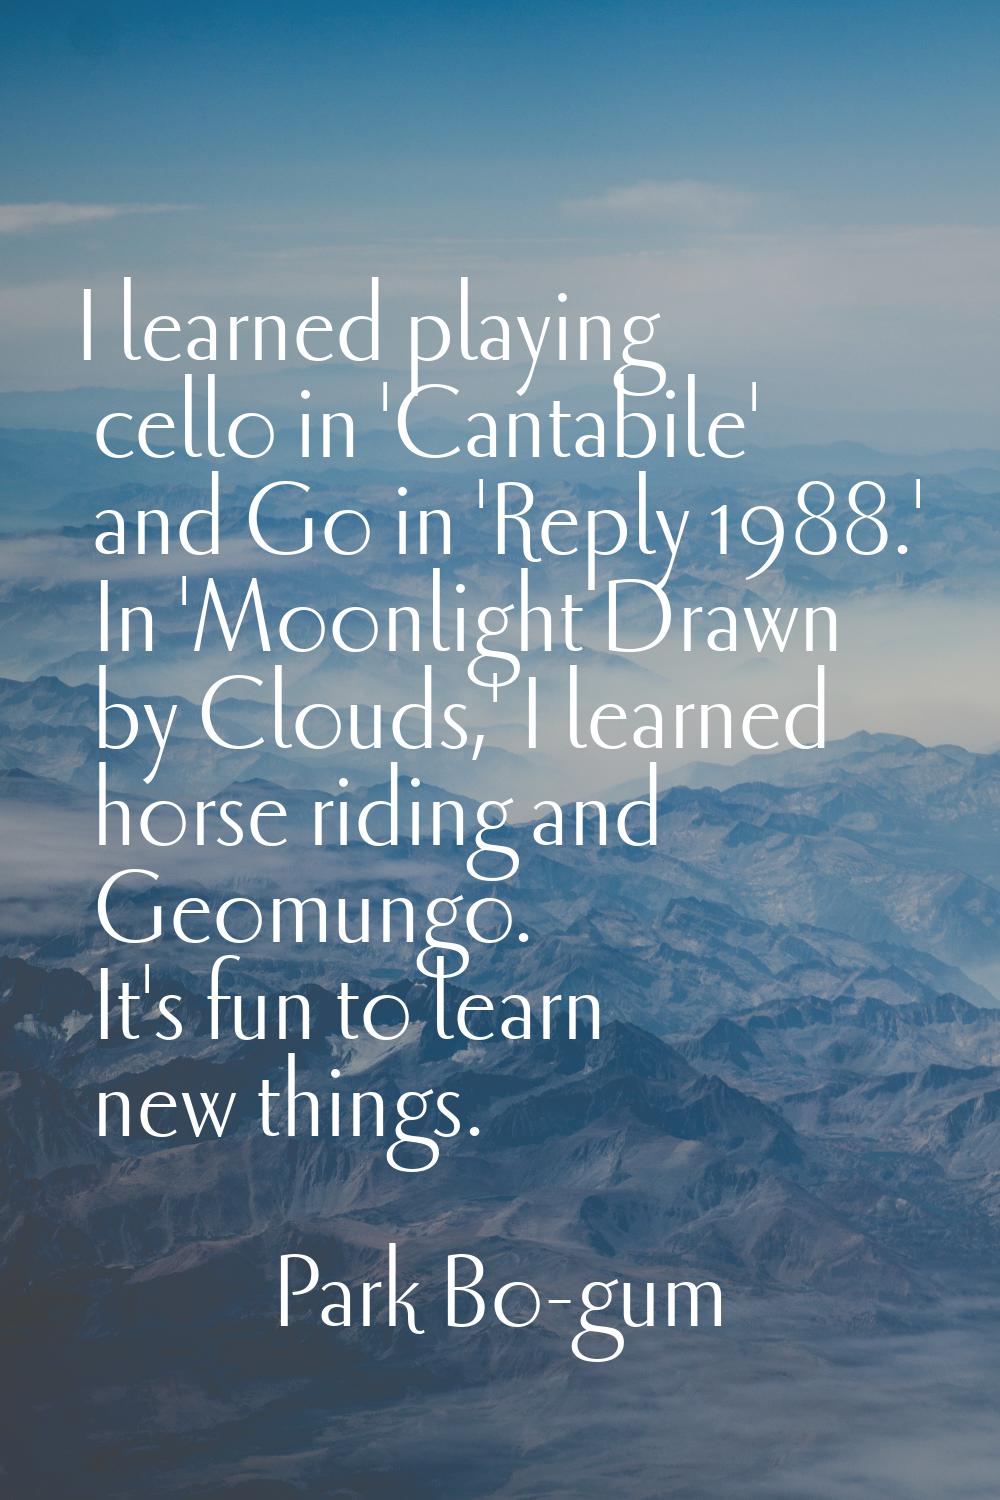 I learned playing cello in 'Cantabile' and Go in 'Reply 1988.' In 'Moonlight Drawn by Clouds,' I le